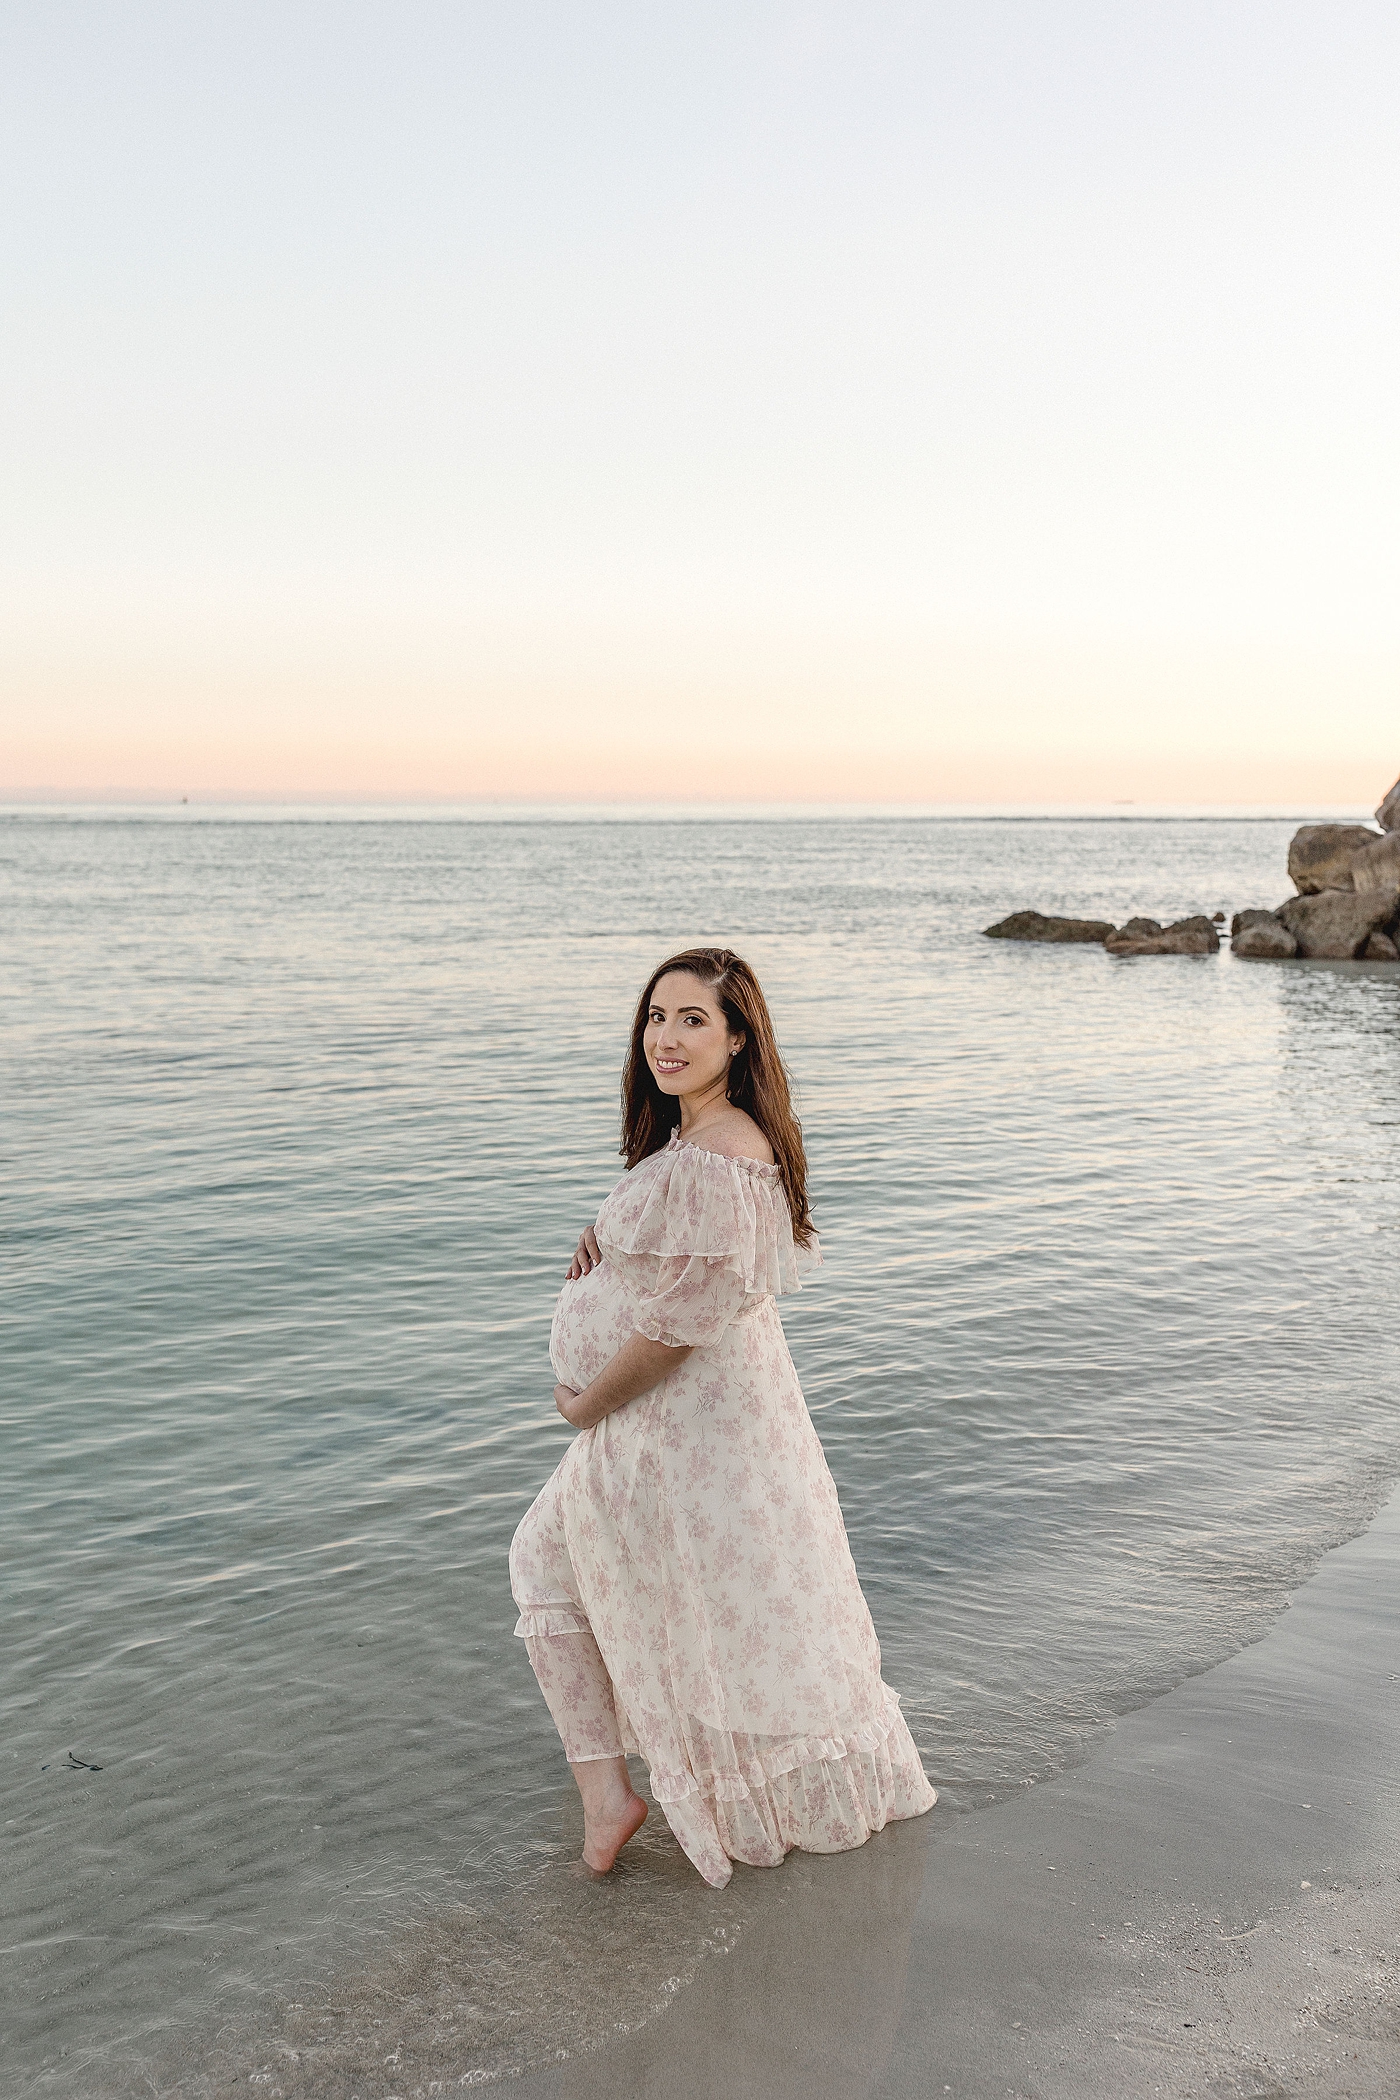 Expectant mom dips her toes in the clear Miami waters during El Farito Beach Miami FL maternity session. Photo by Ivanna Vidal Photography.